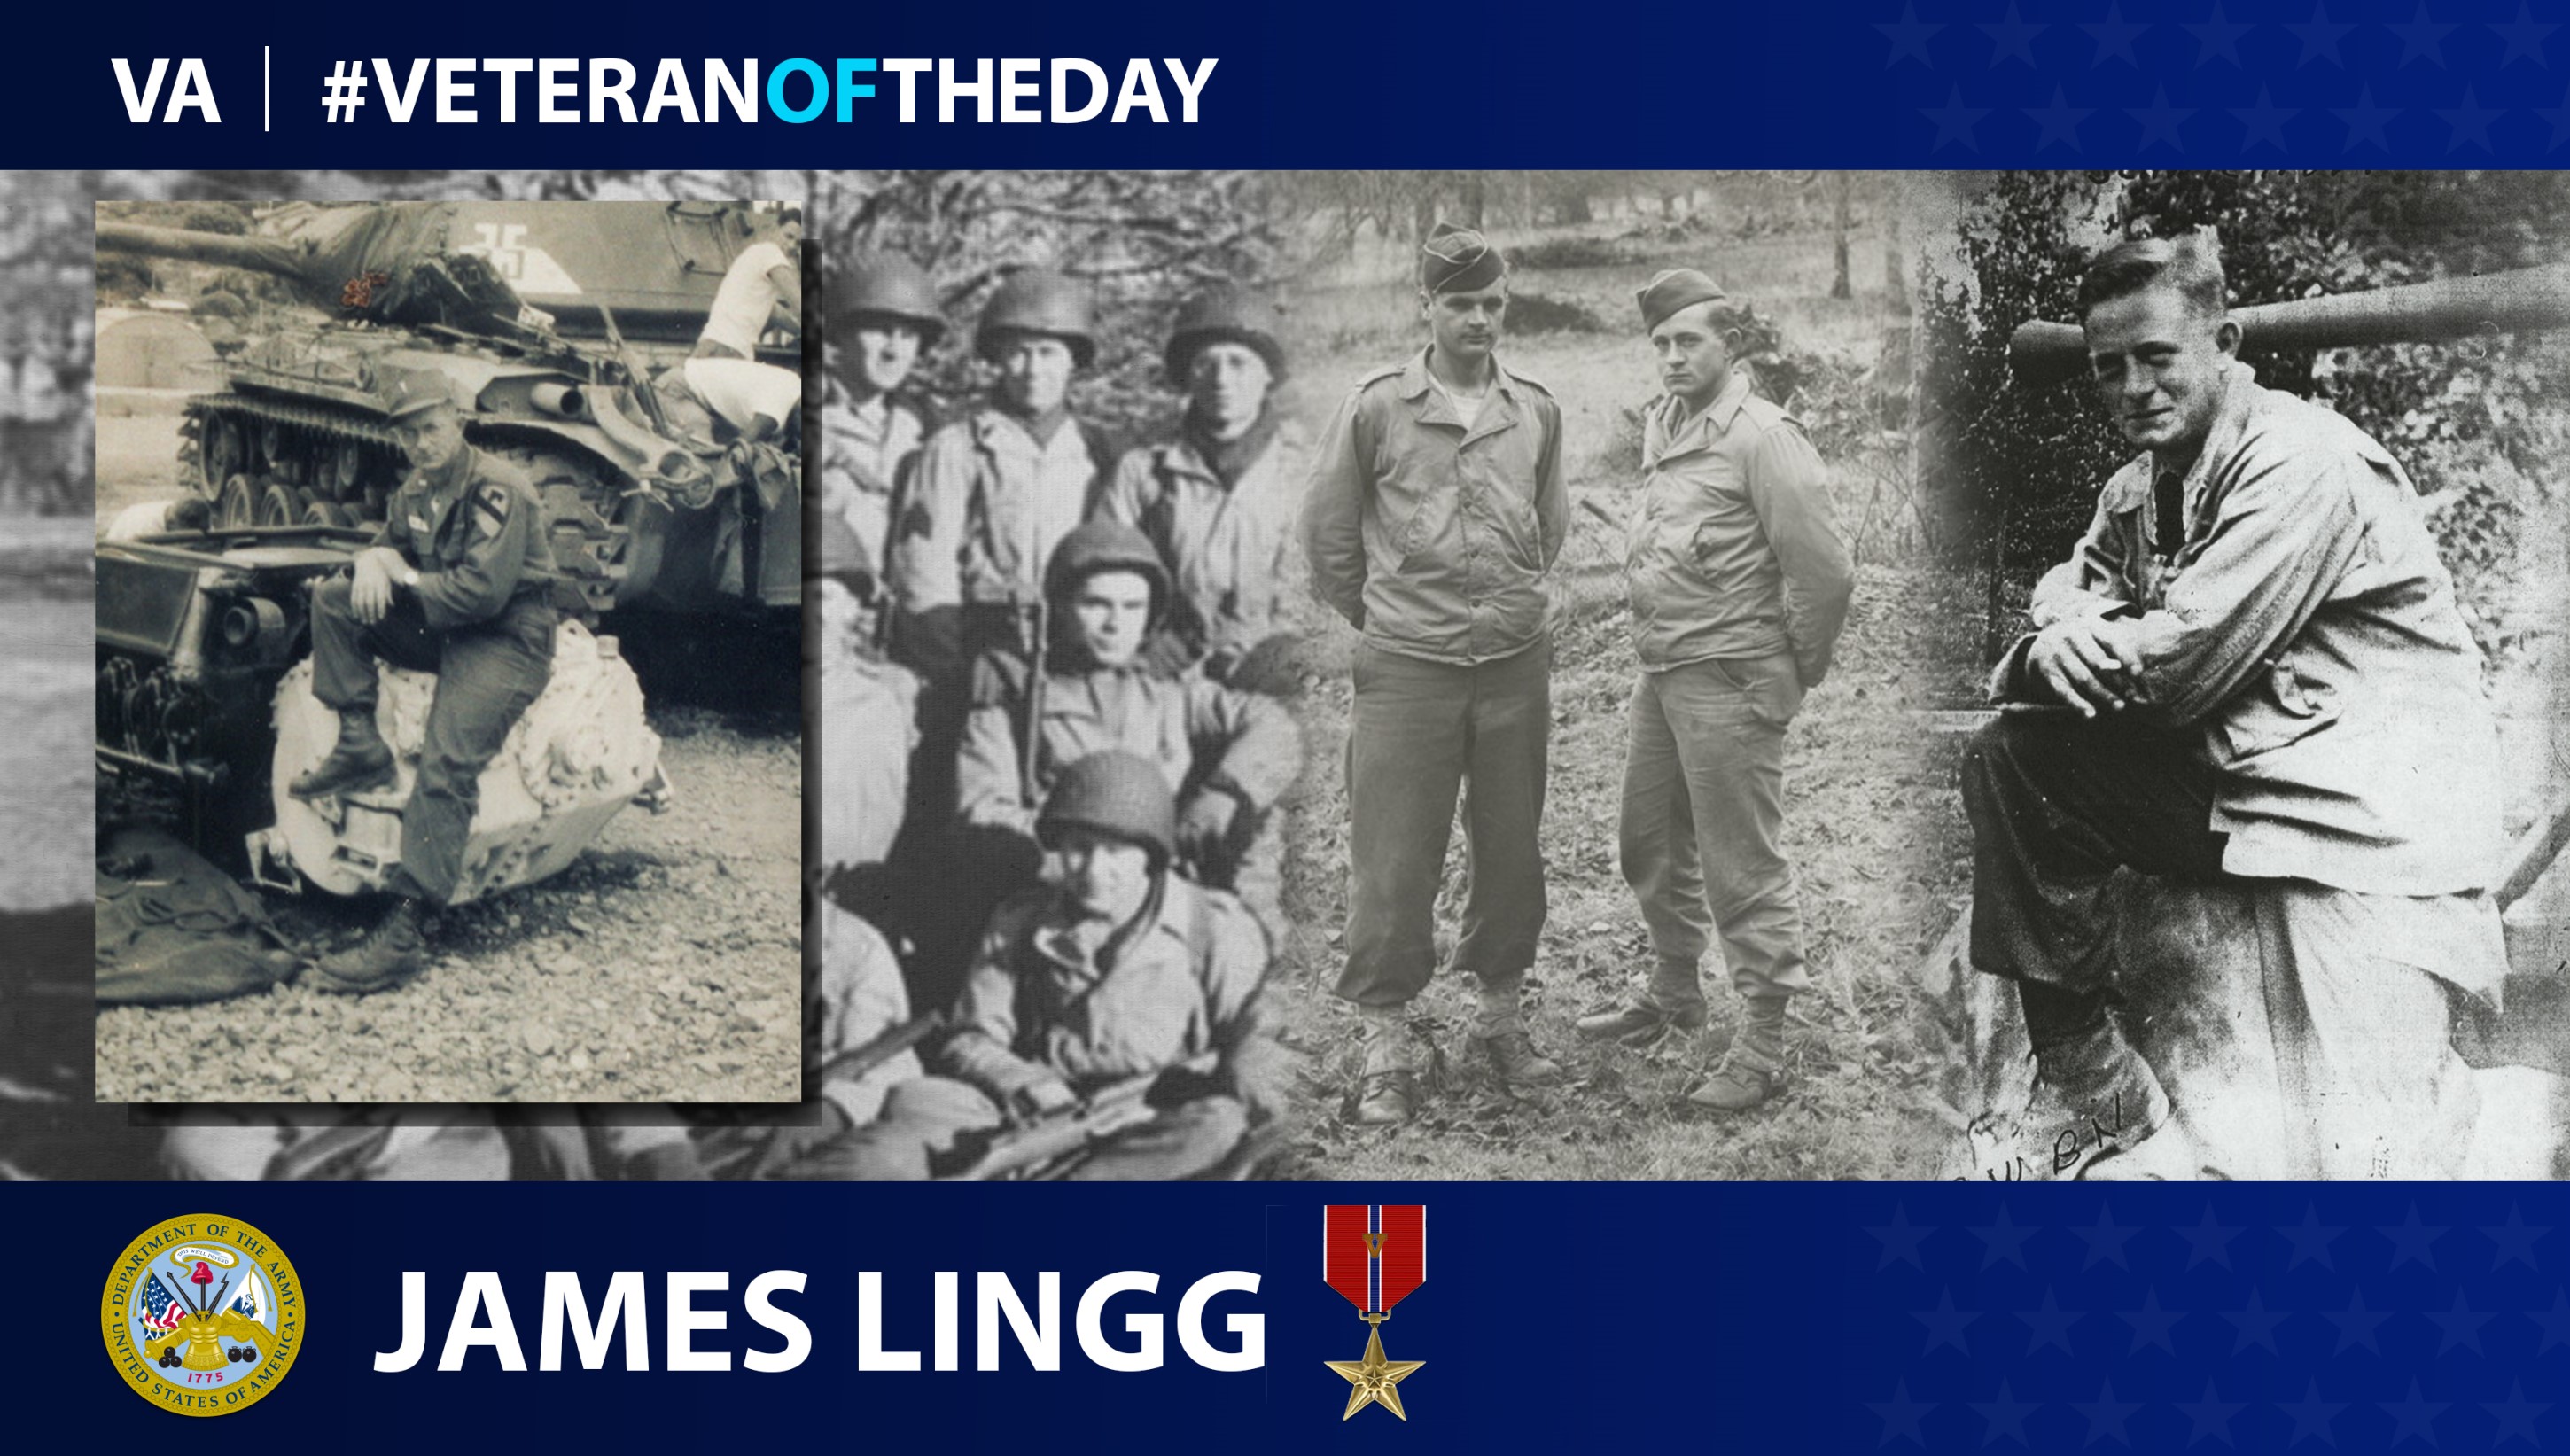 James Thomas Lingg is today's Veteran of the Day.